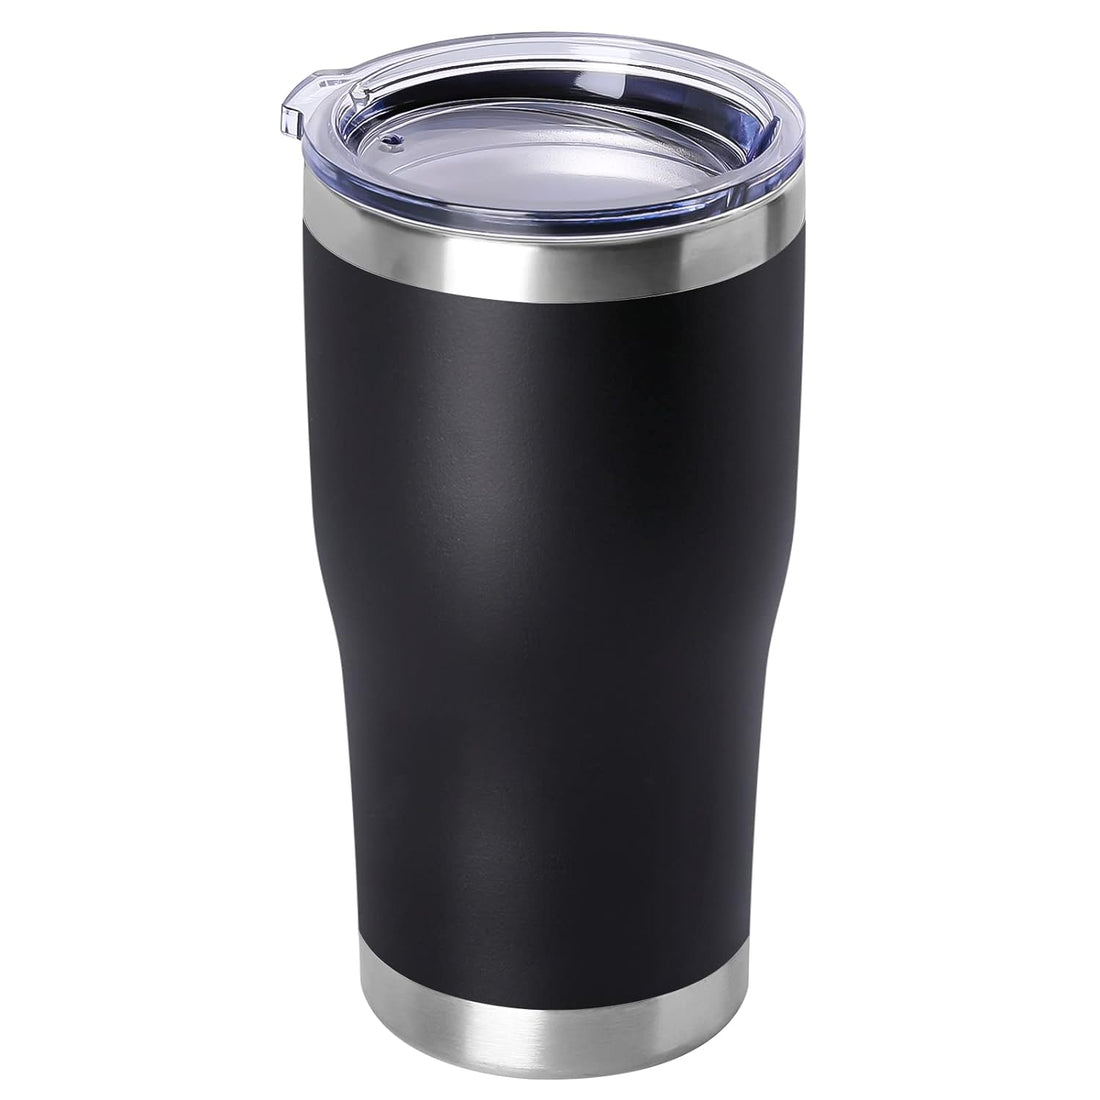 DOMICARE 20oz Tumbler with Lid Stainless Steel Tumblers Bulk, Double Wall Vacuum Insulated Coffee Travel Mug Powder Coated Tumbler, Black